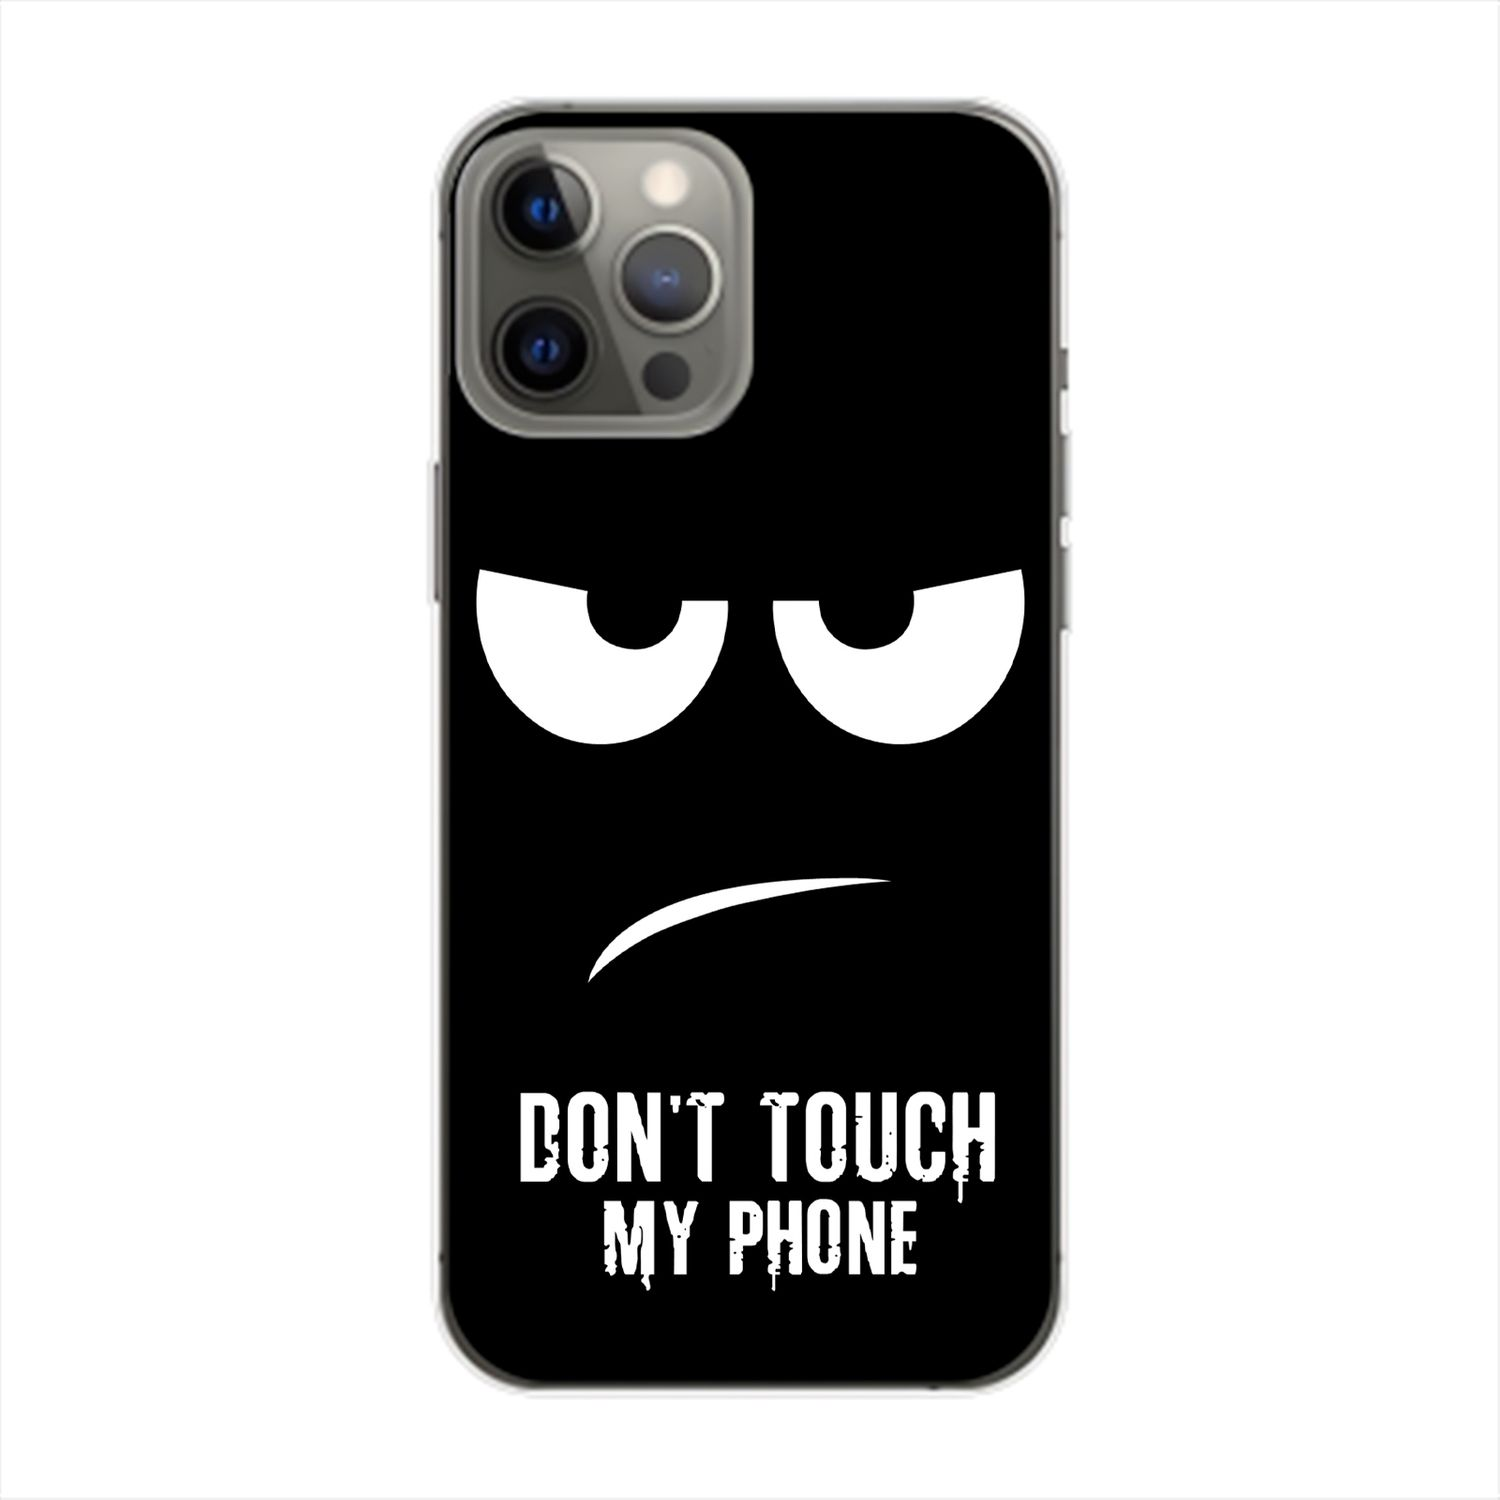 Schwarz DESIGN Apple, Touch iPhone 14 KÖNIG Max, Phone Pro Dont Backcover, My Case,